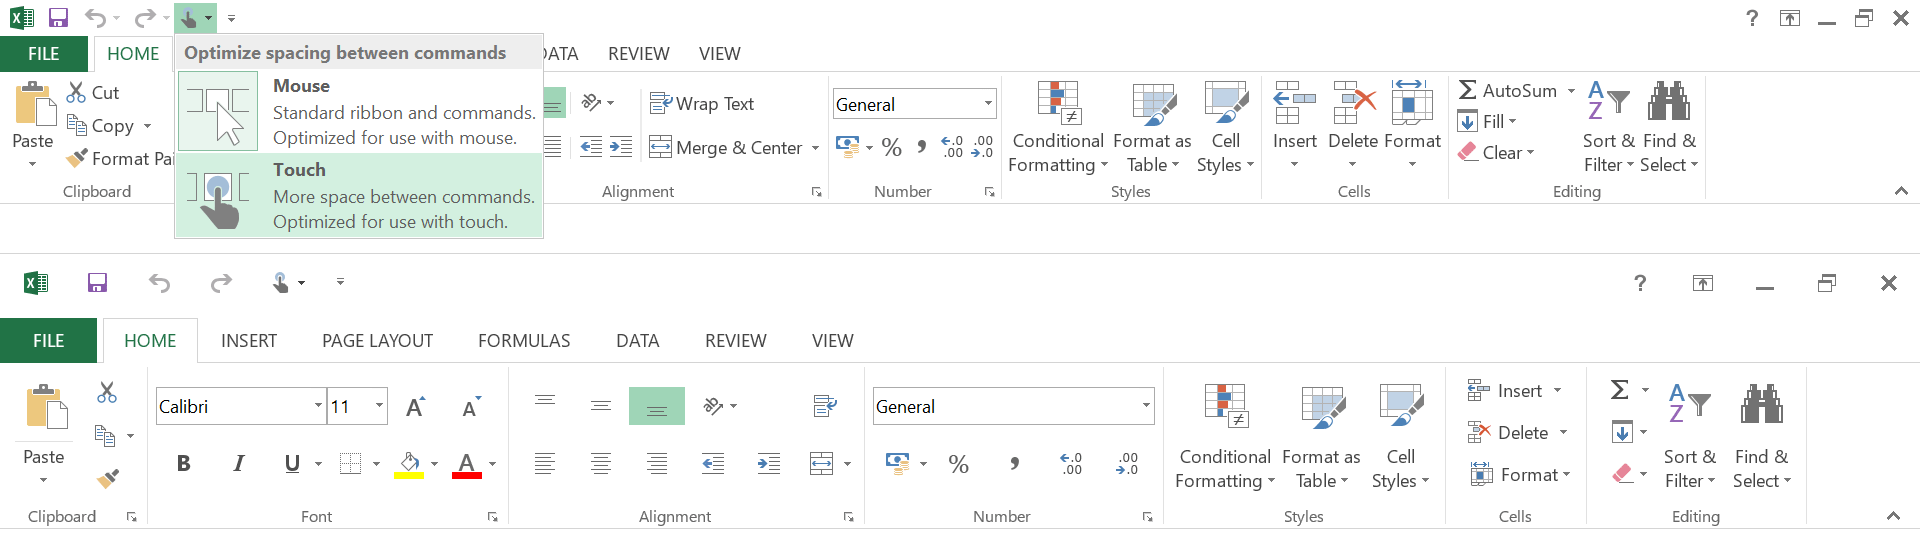 Office 2013 in Windows offers a 'Touch/Mouse mode' switch - shown by default on touch-capable devices, but can be accessed even on mouse-only devices; switching to touch mode increases spacing and touch target of all ribbon controls